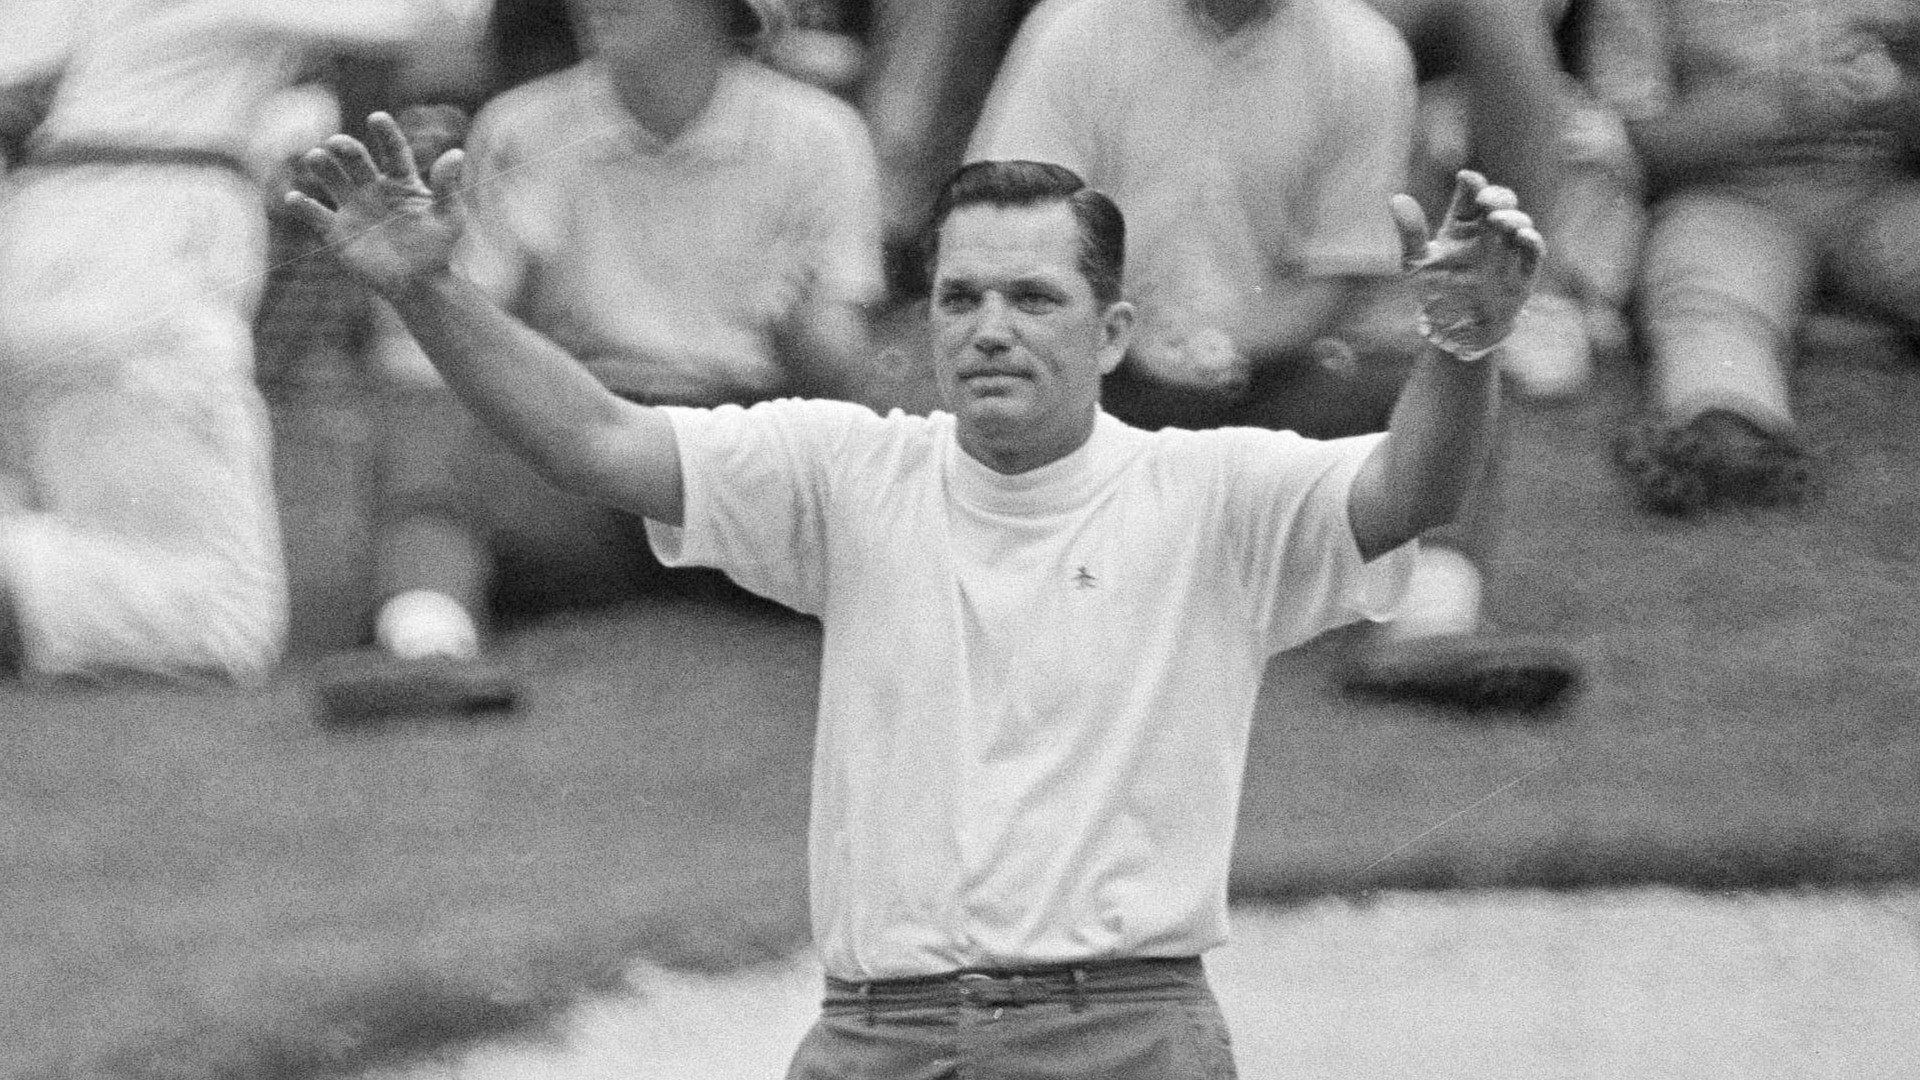 Goalby won 14 times on tour including the 1968 Masters title. He was 92 years old.